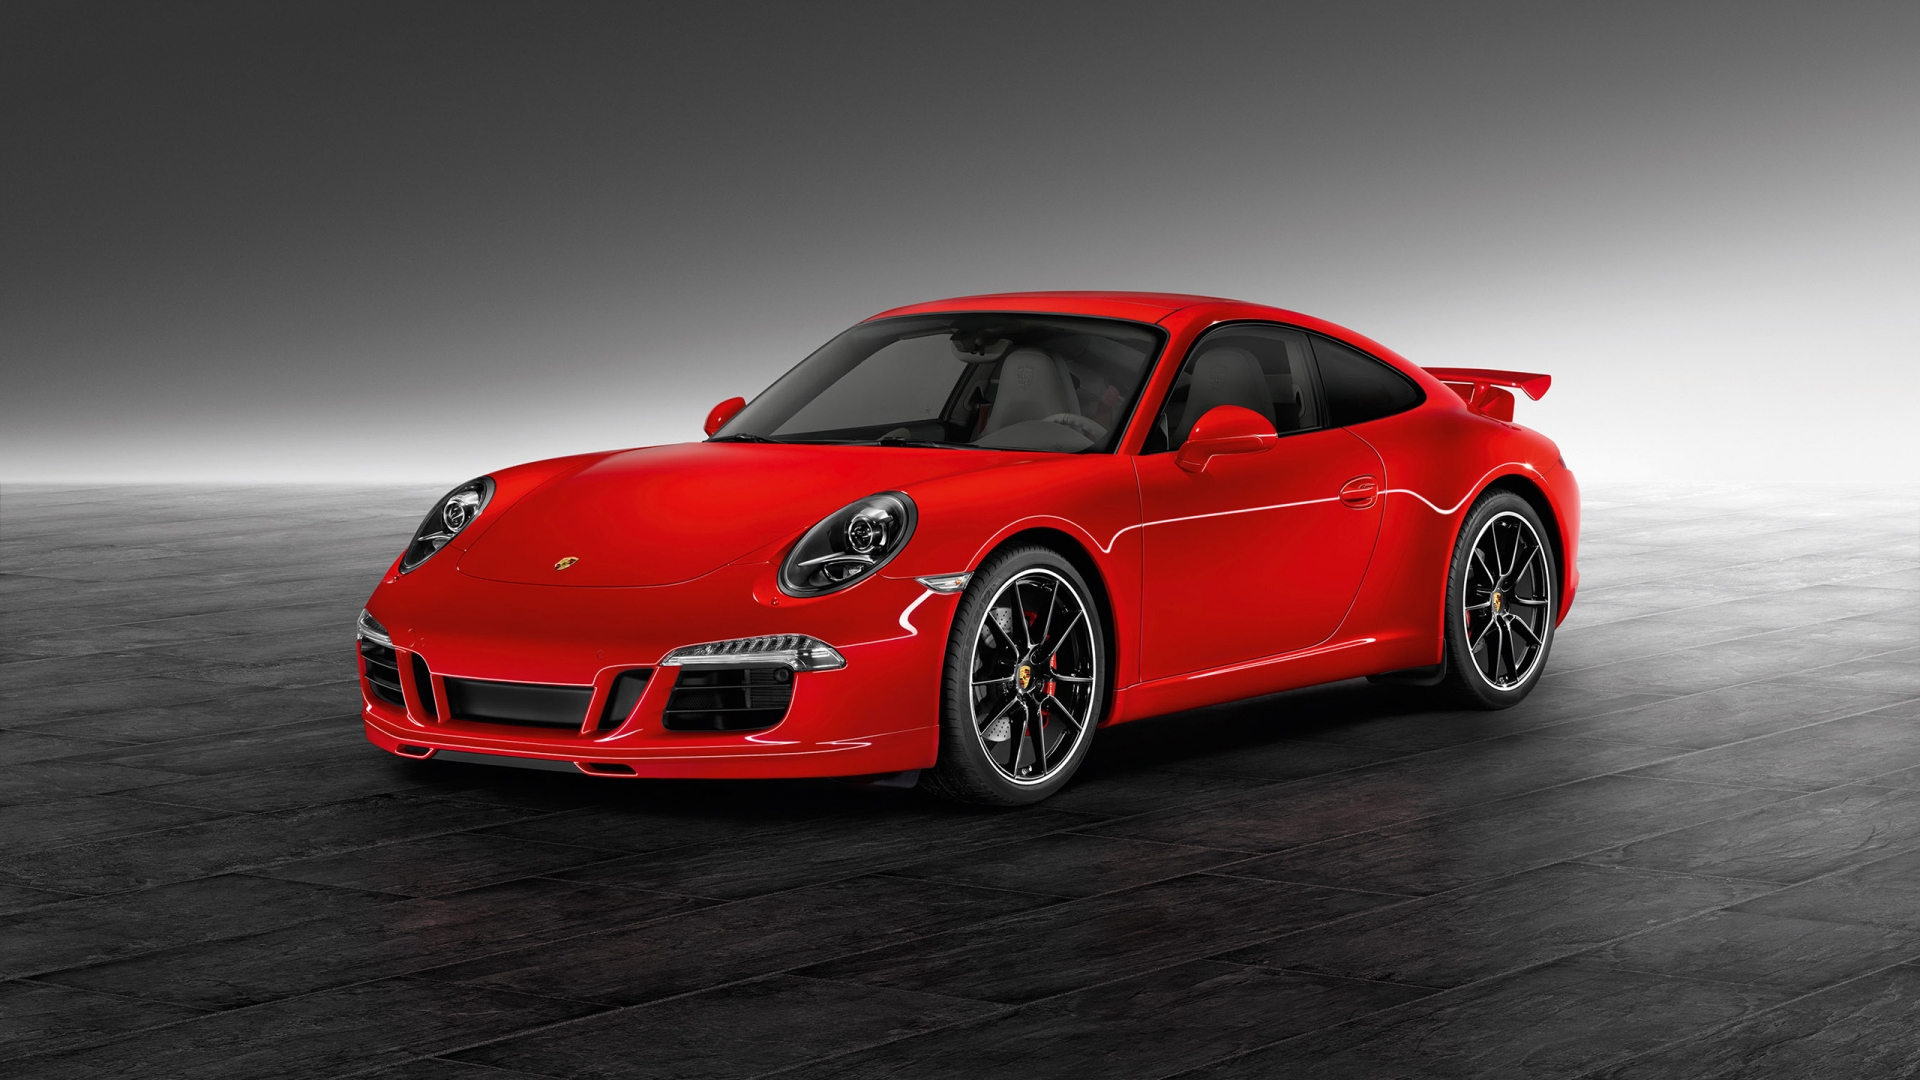 Red 911 Carrera S for 1920 x 1080 HDTV 1080p resolution